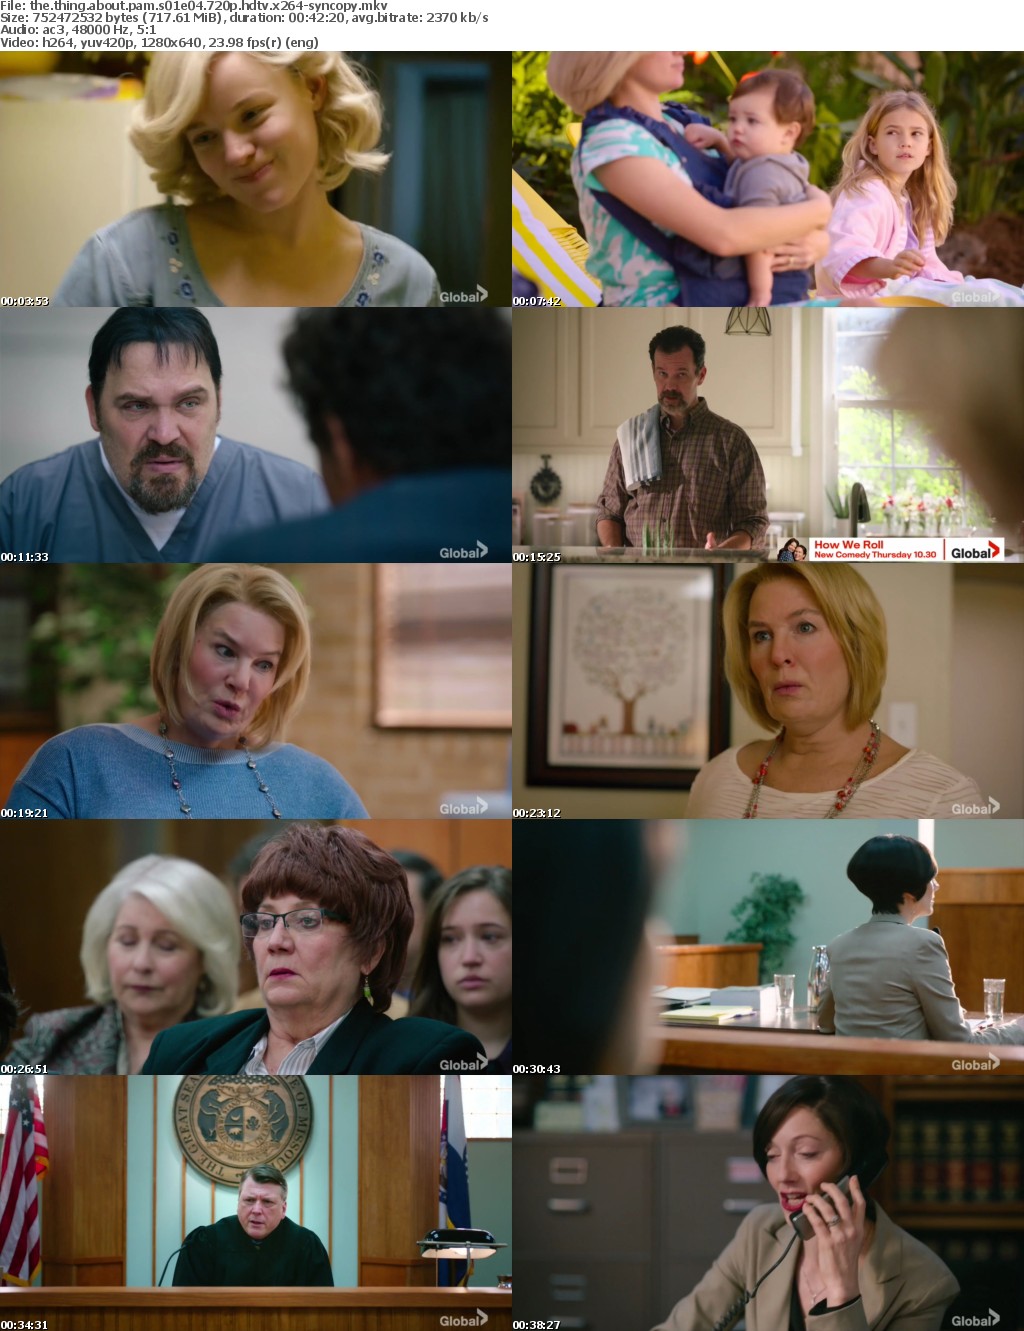 The Thing About Pam S01E04 720p HDTV x264-SYNCOPY